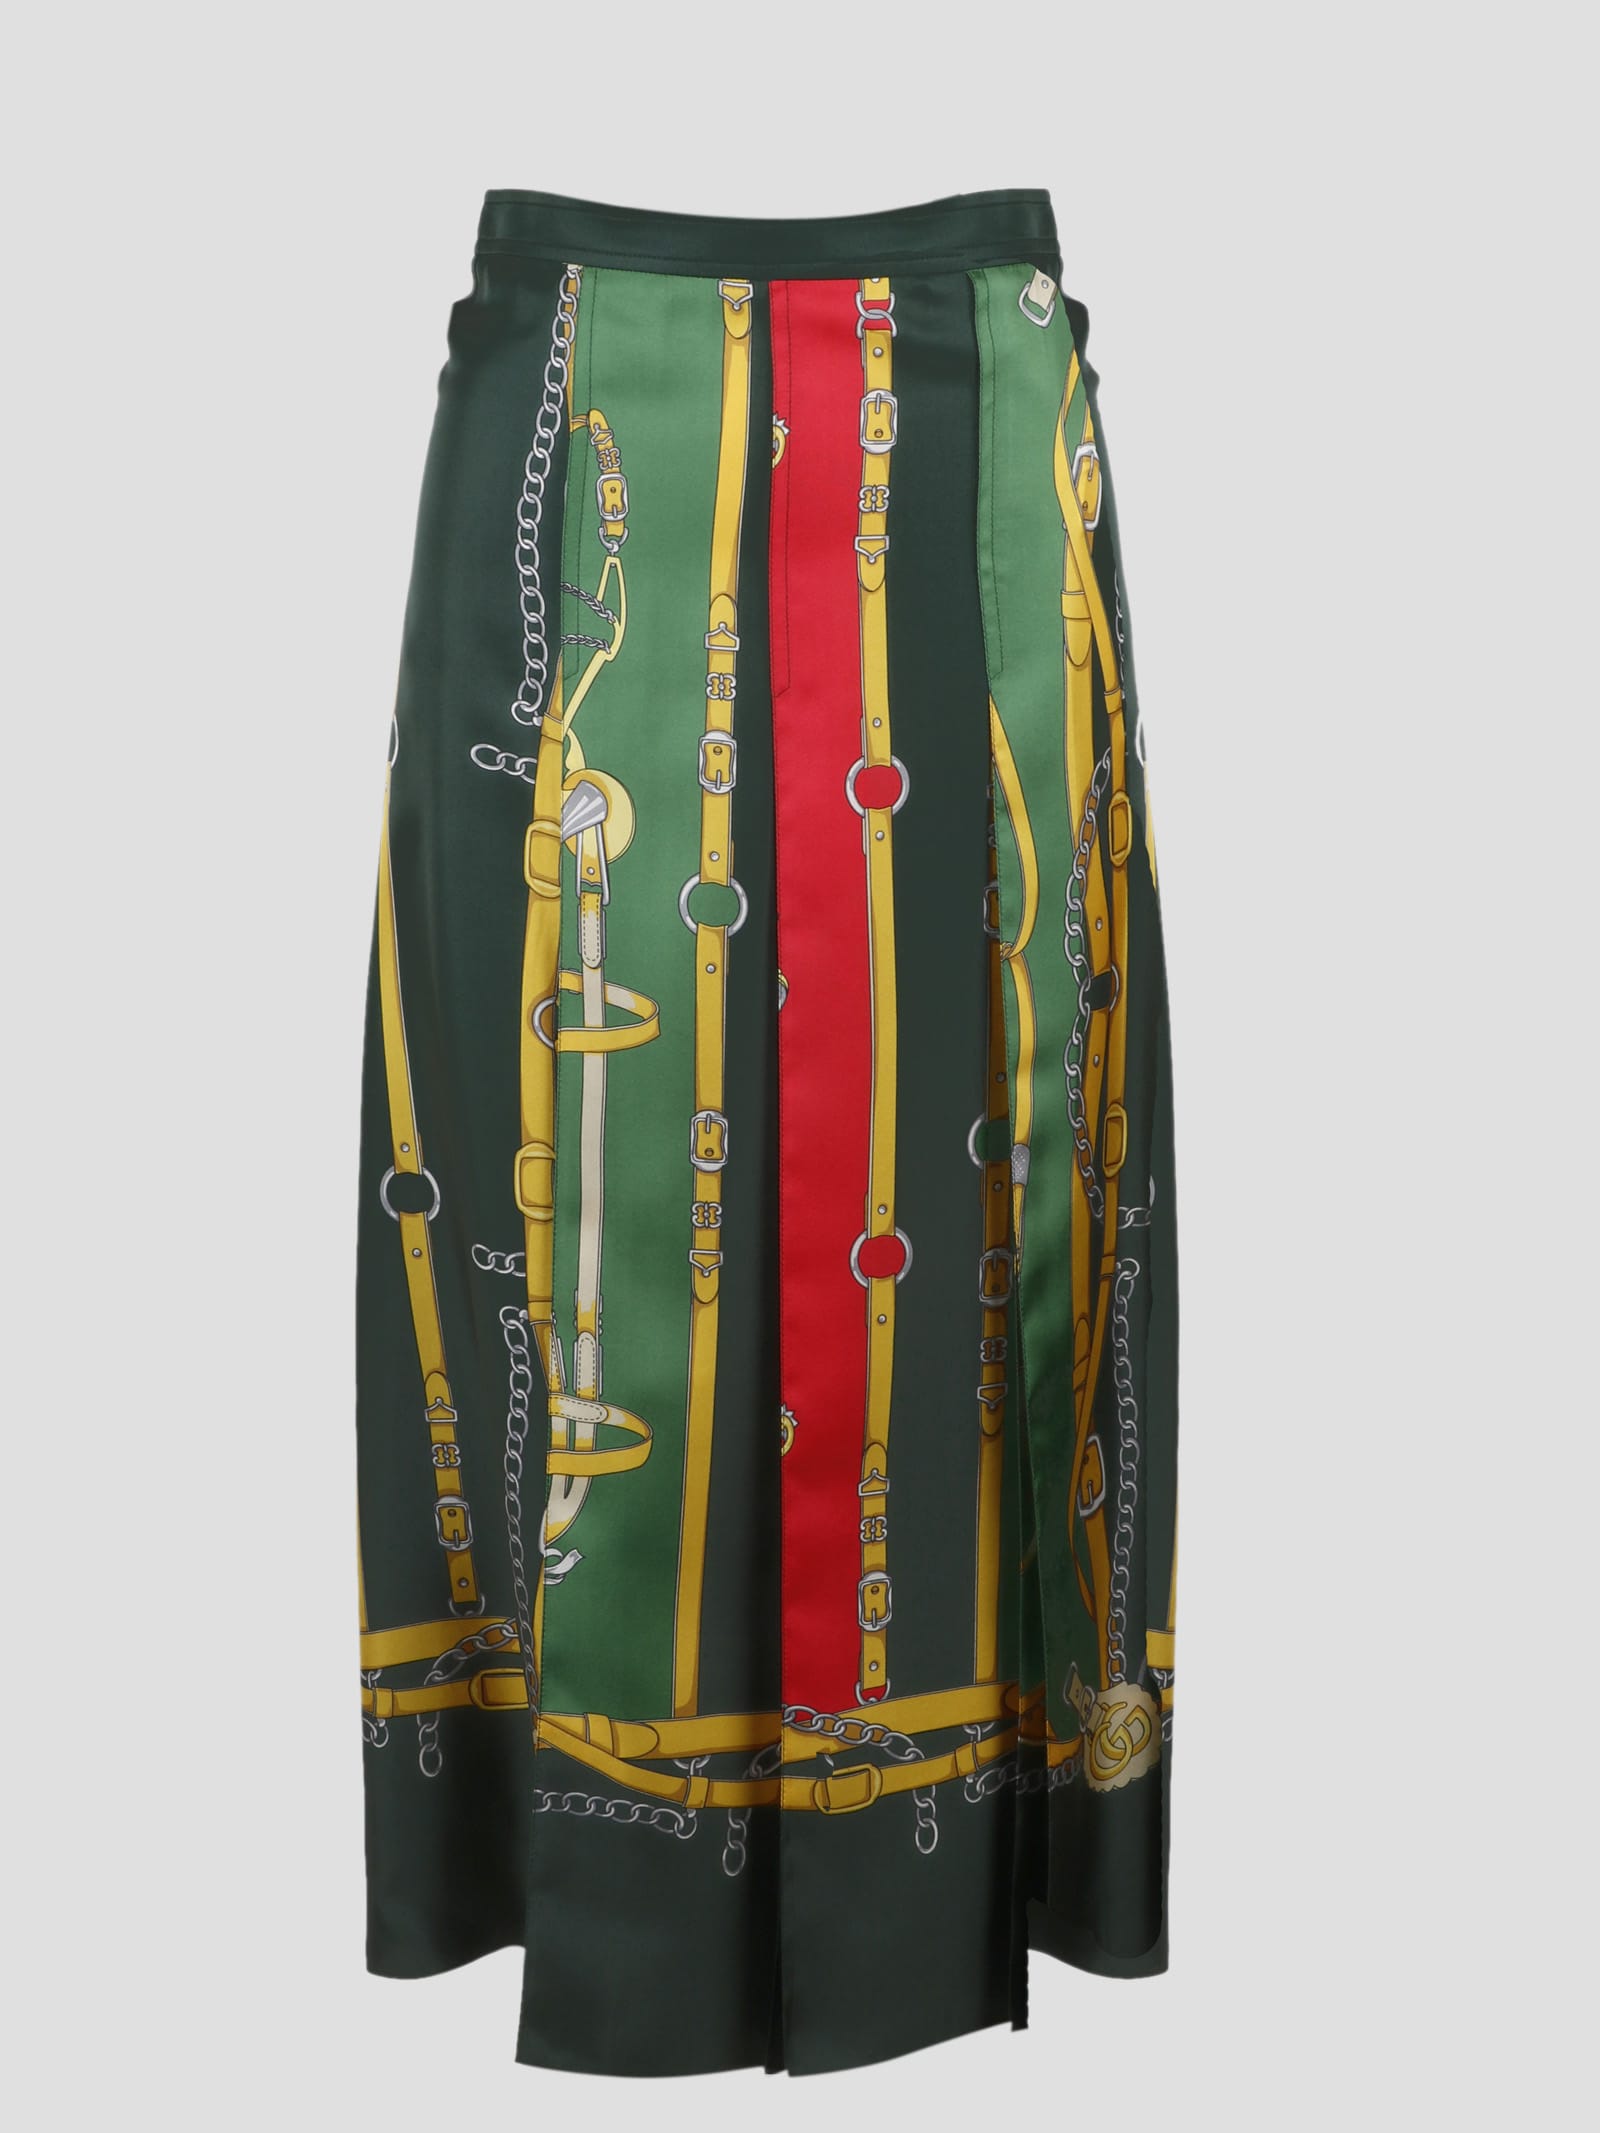 GUCCI HARNESS AND DOUBLE G SILK SKIRT